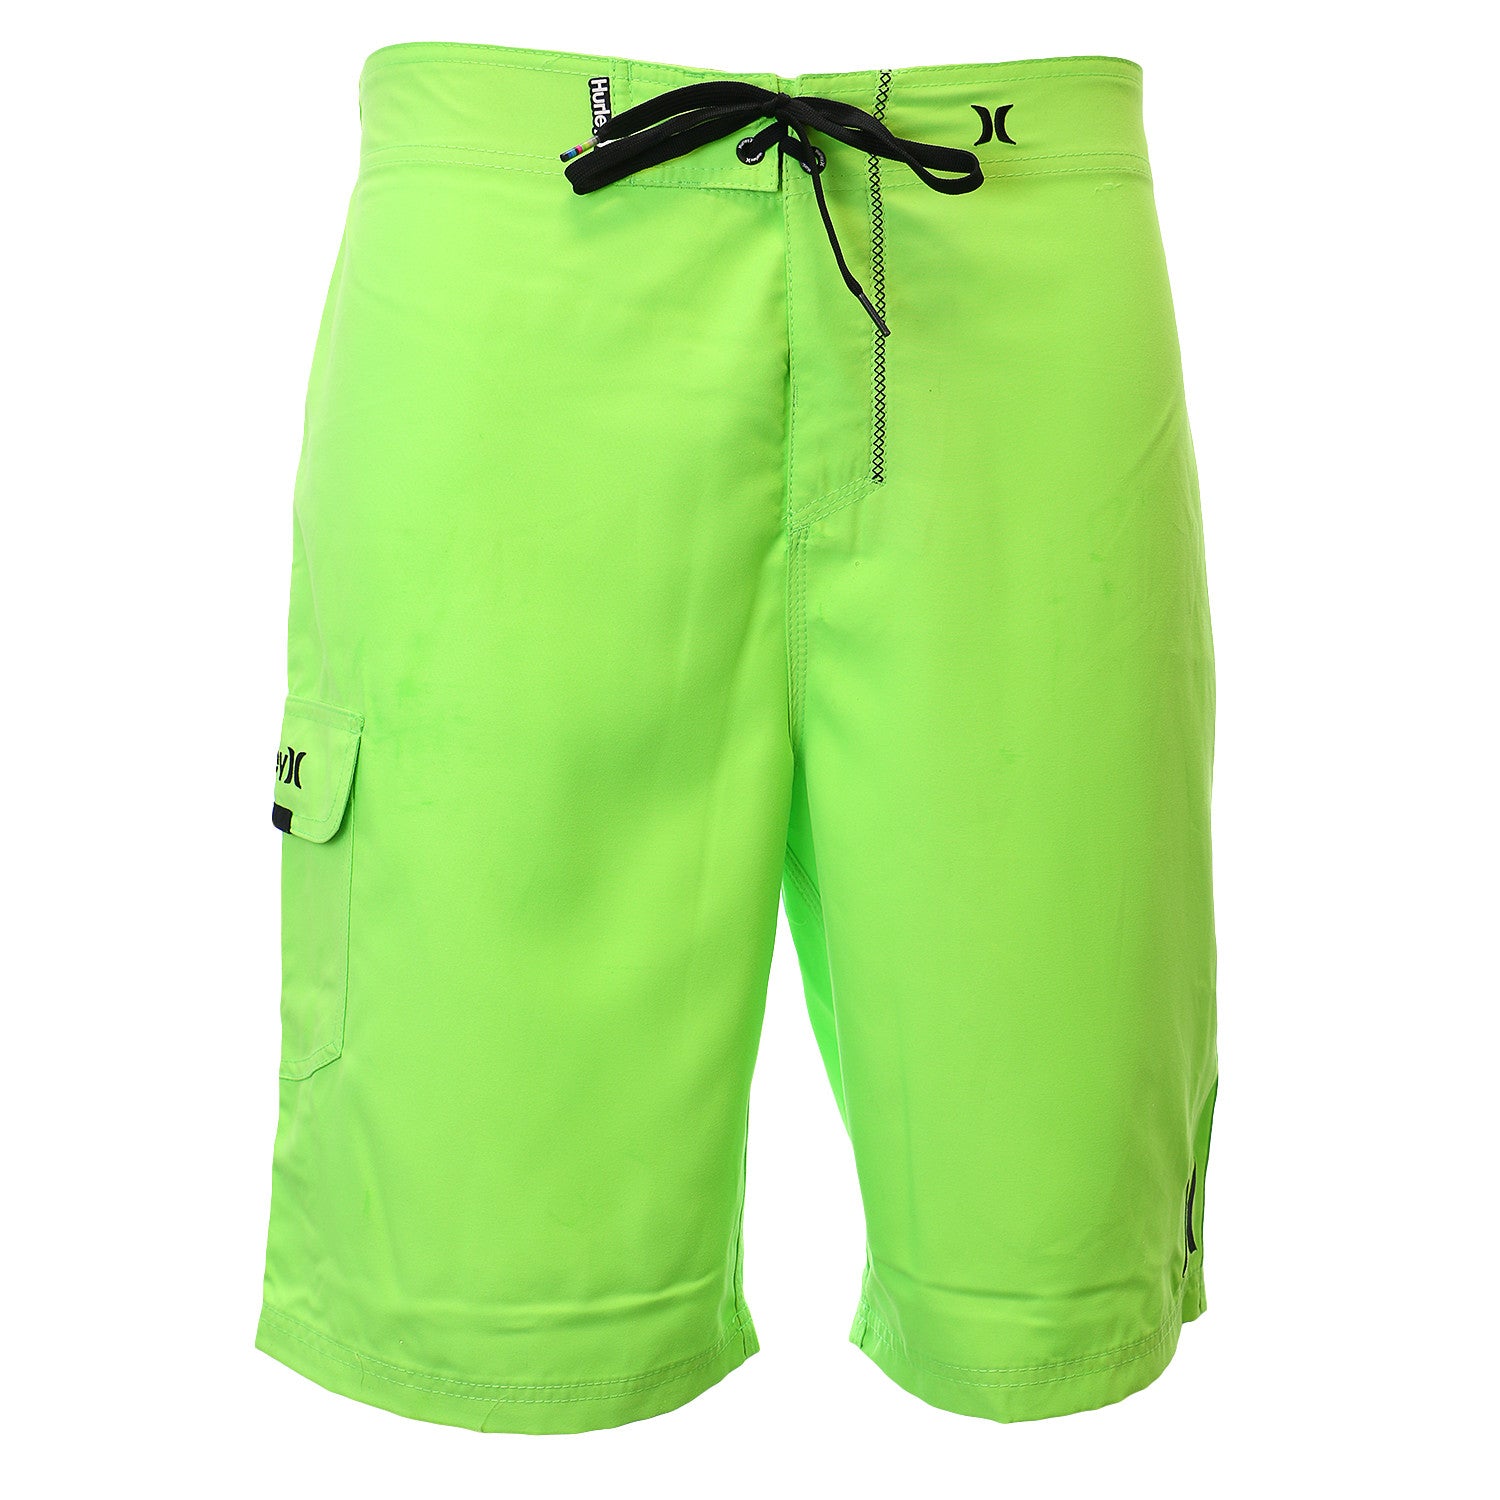 Hurley One and Only 22-Inch Boardshort - Men's - Shoplifestyle